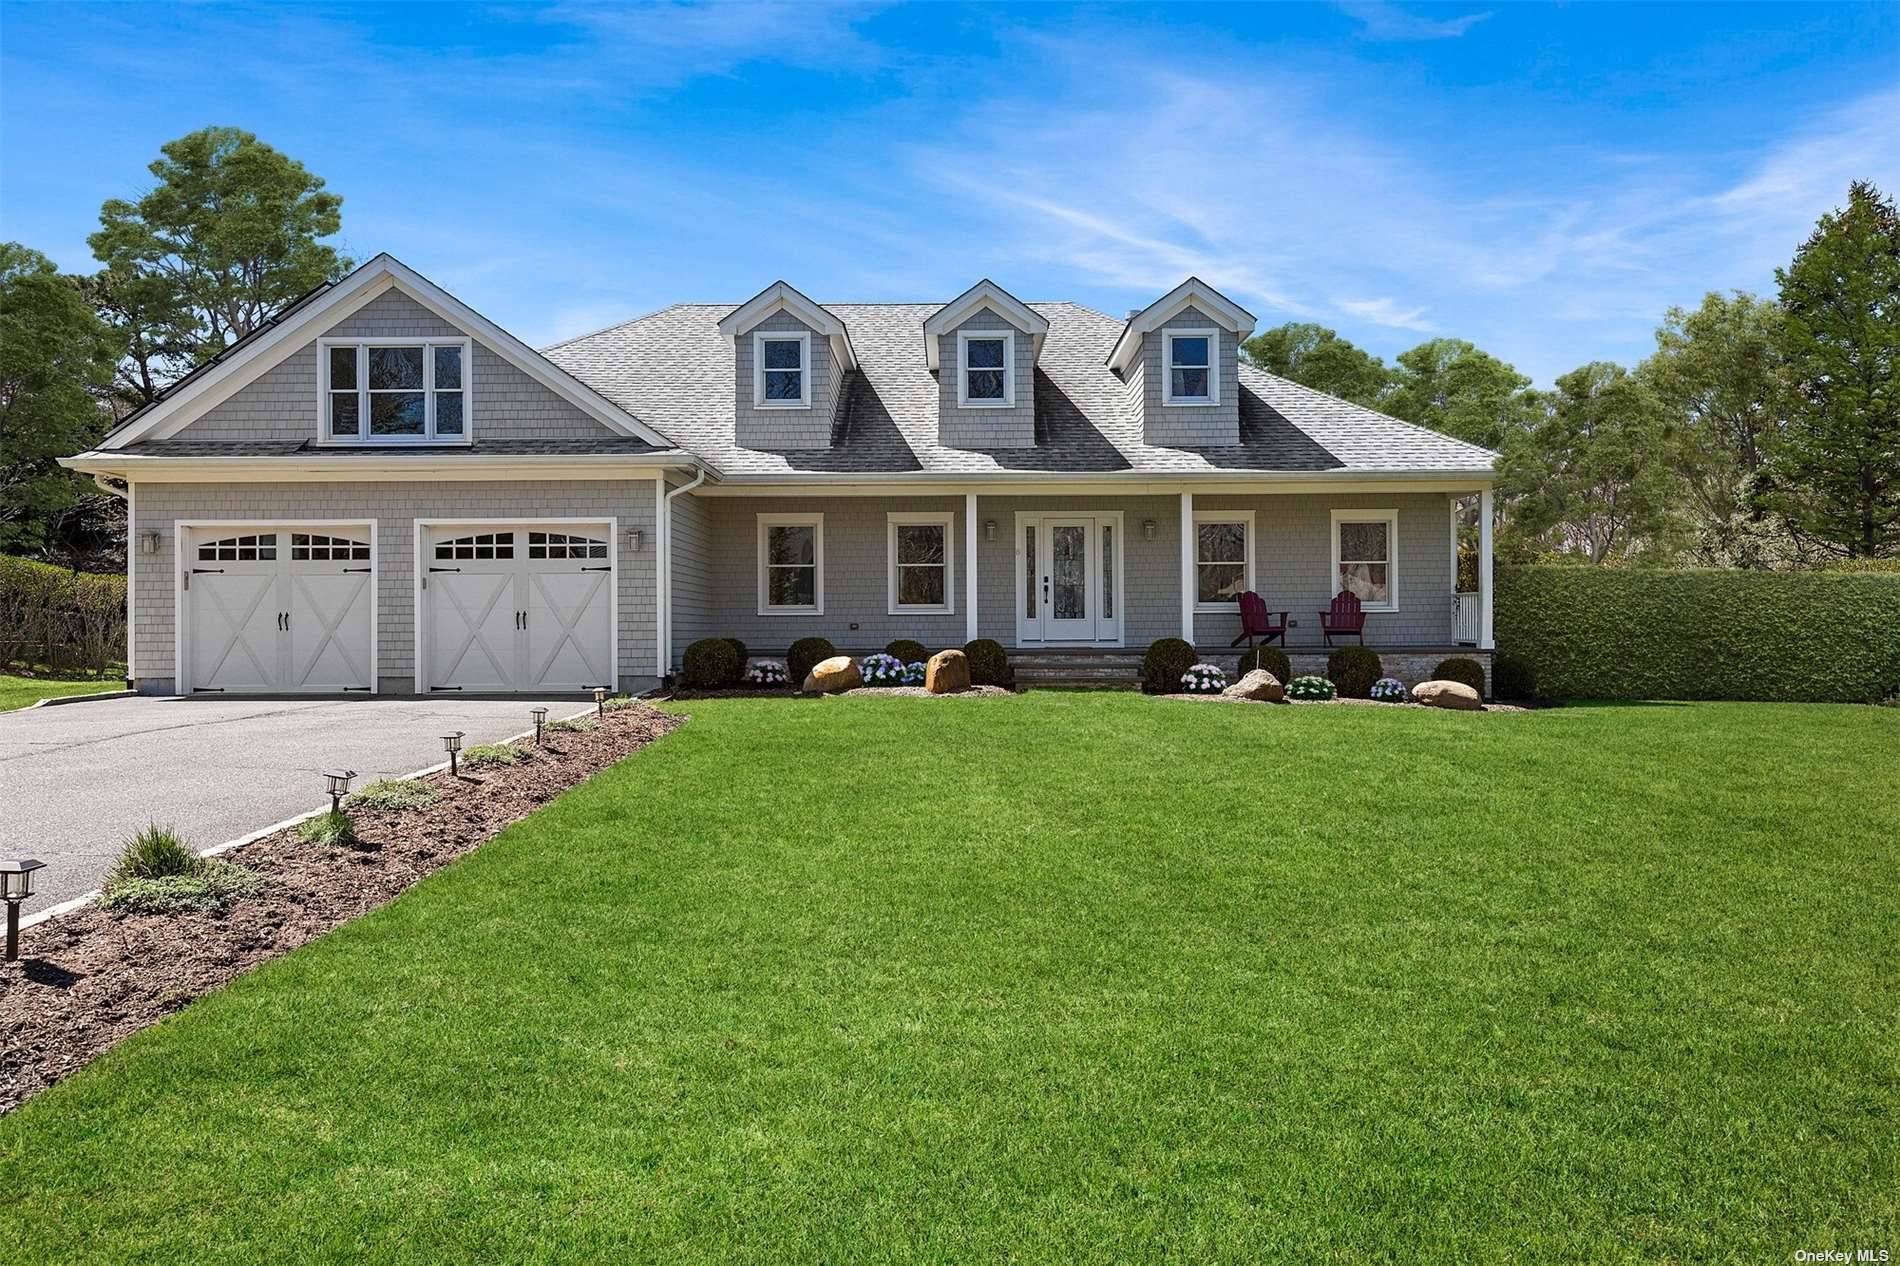 Nestled on. 89 acres in the heart of the Hamptons, this pristine home located on Quail Run in the desirable Ravenswood Community offers all amenities required by today's discerning Hampton's ...